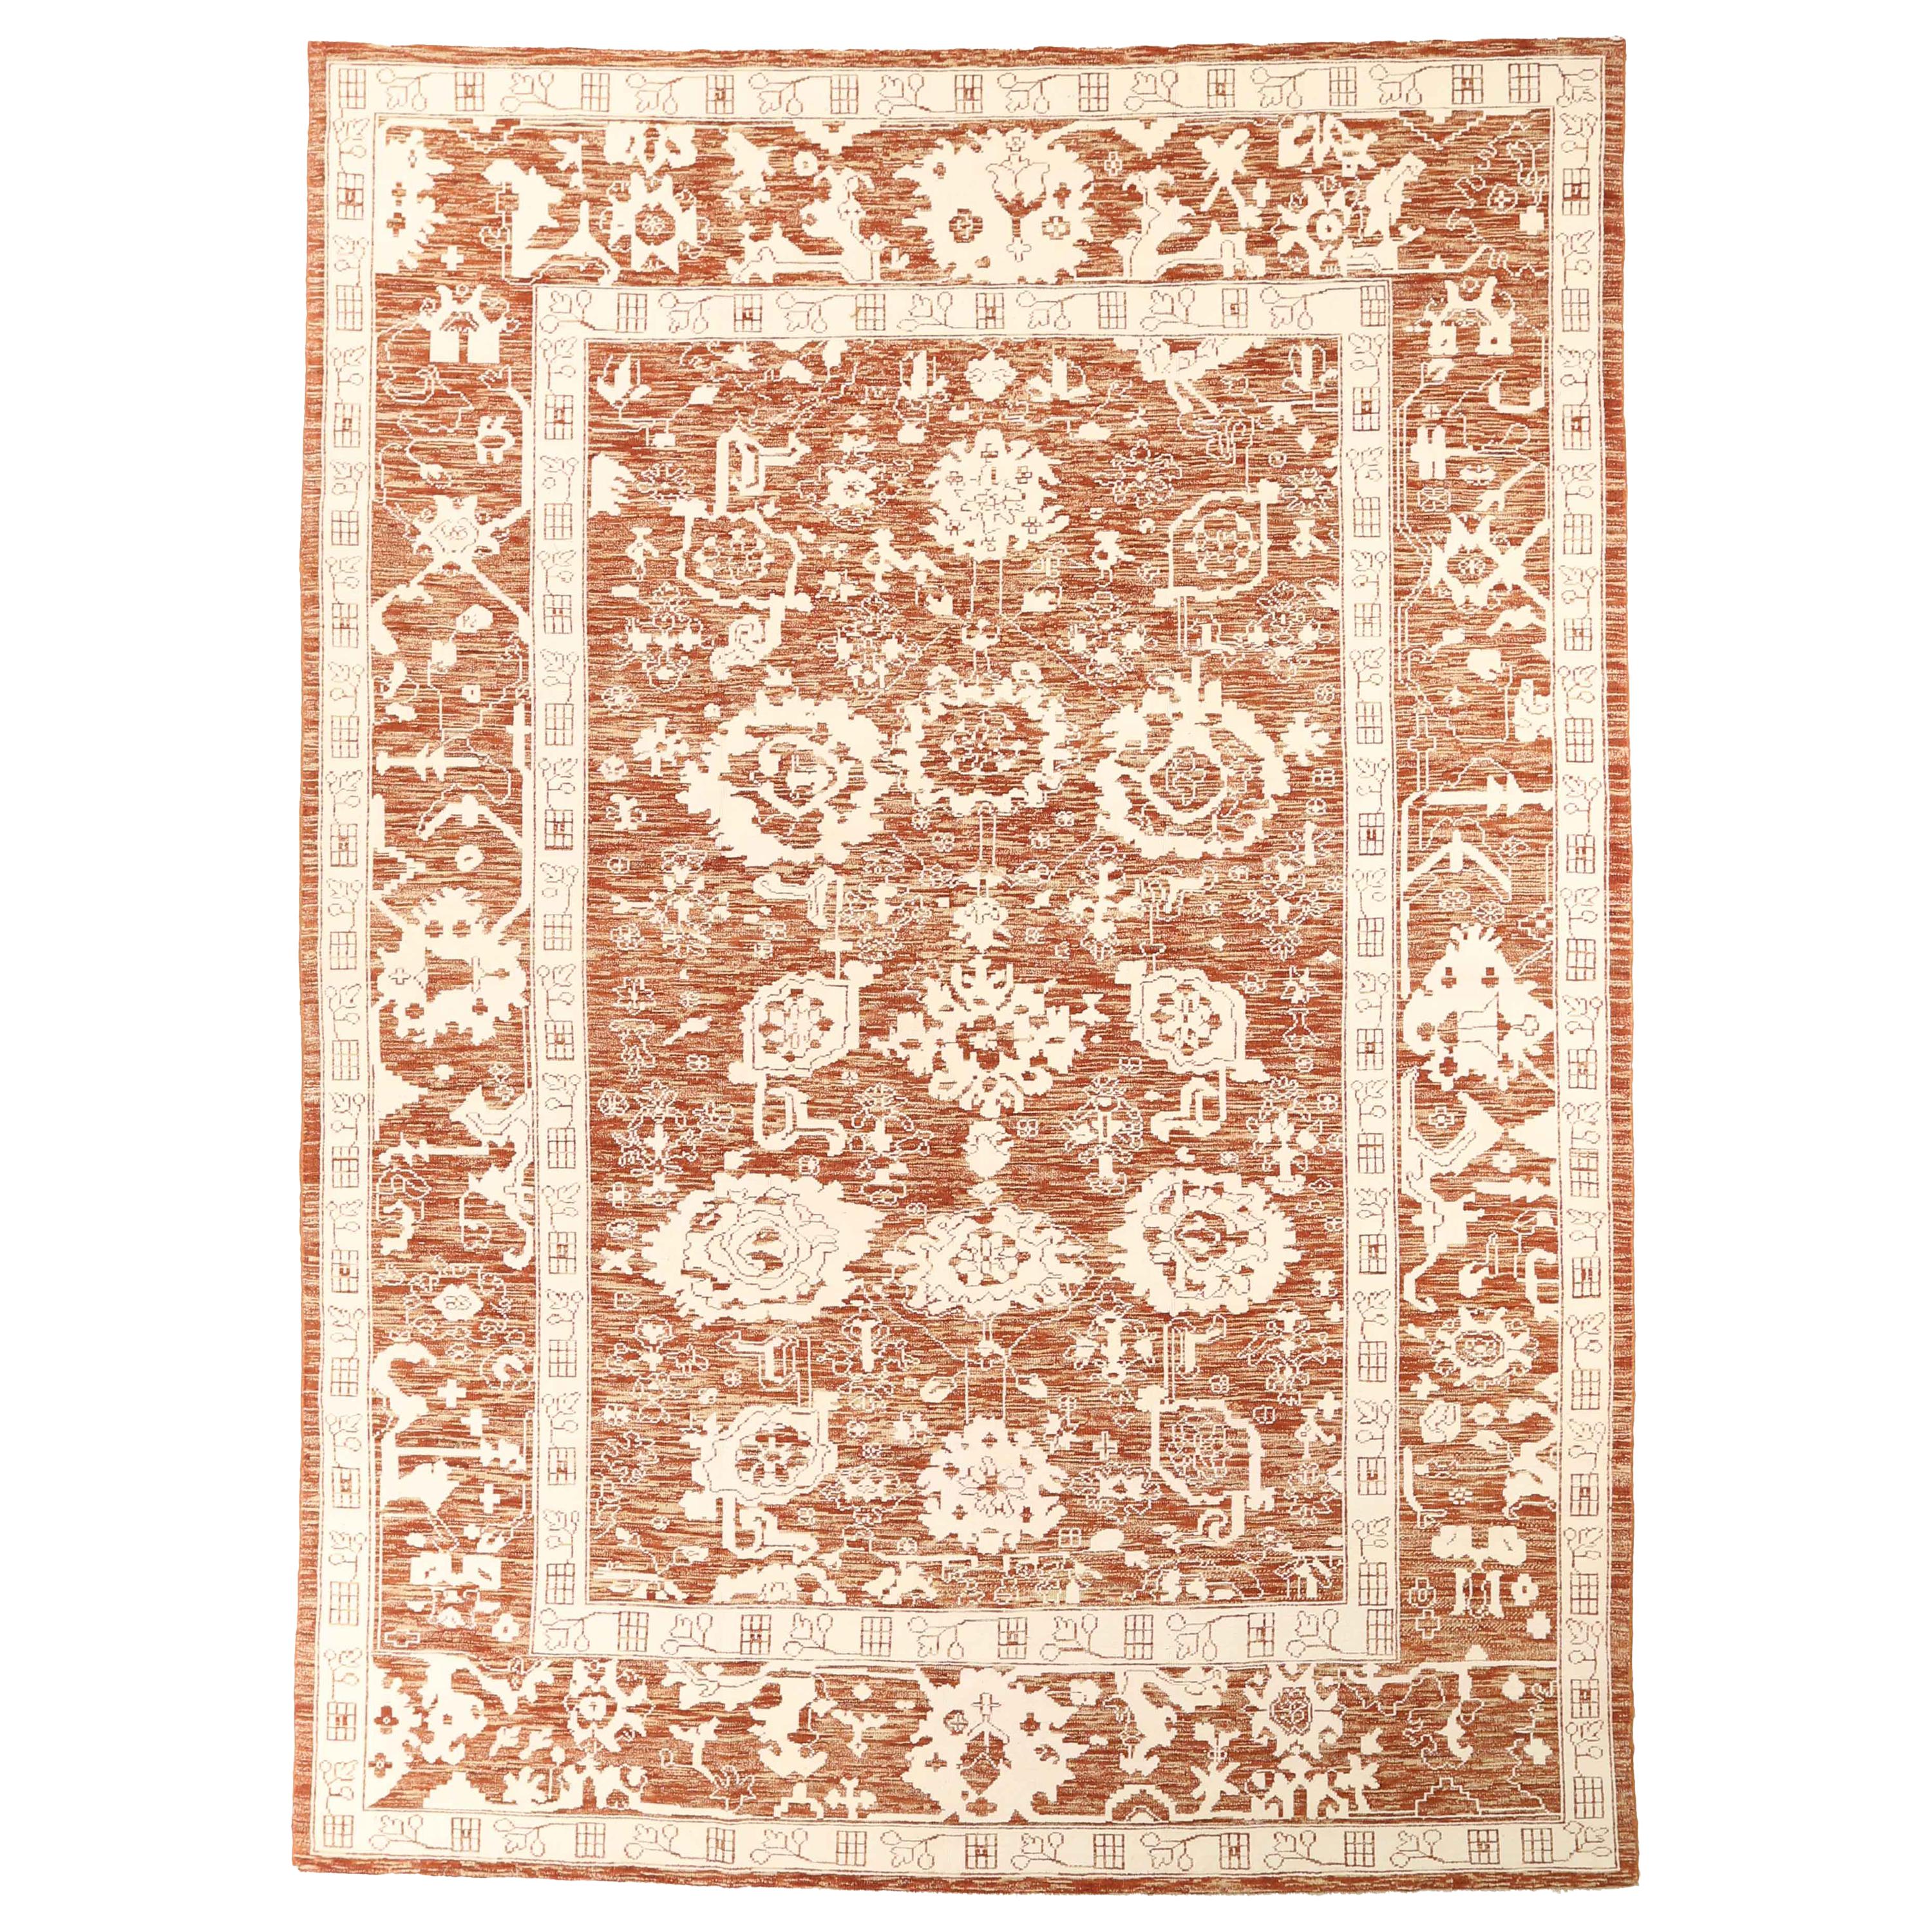 Oversized Persian Oushak Rug with Rust-Colored Field and White Floral Details